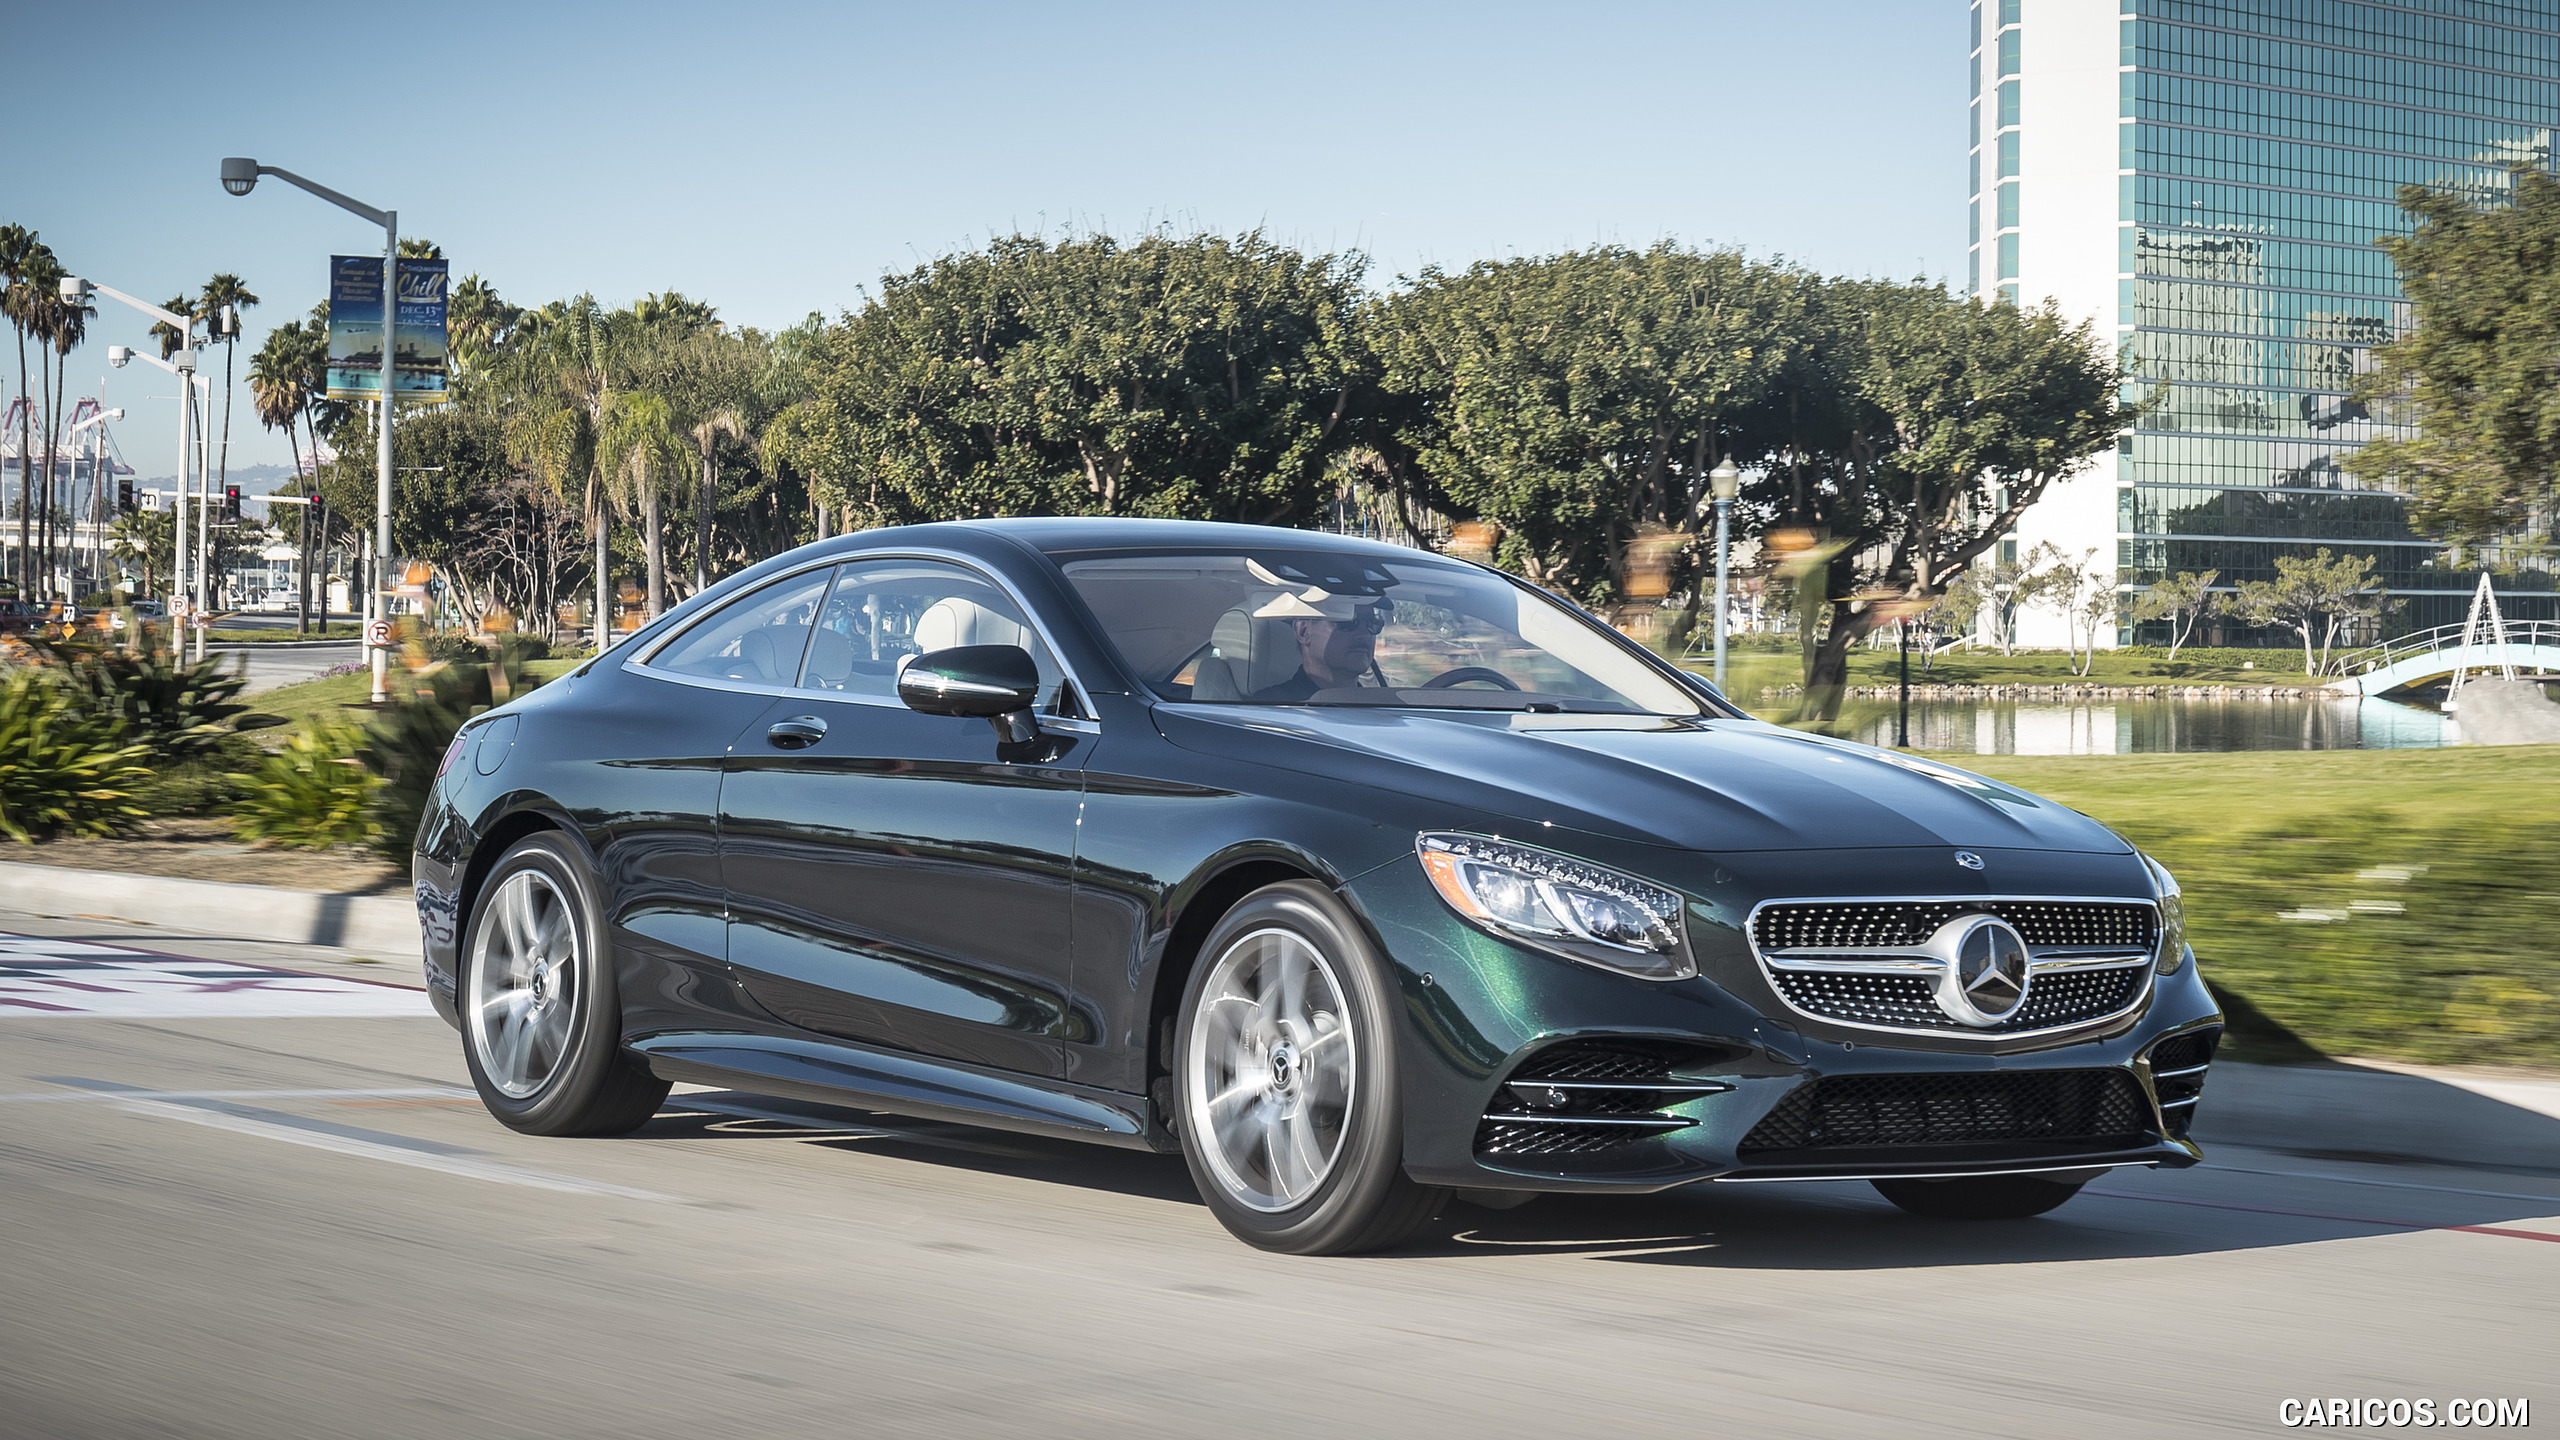 2018 Mercedes-Benz S560 S-Class Coupe (US-Spec) - Front Three-Quarter, #20 of 35